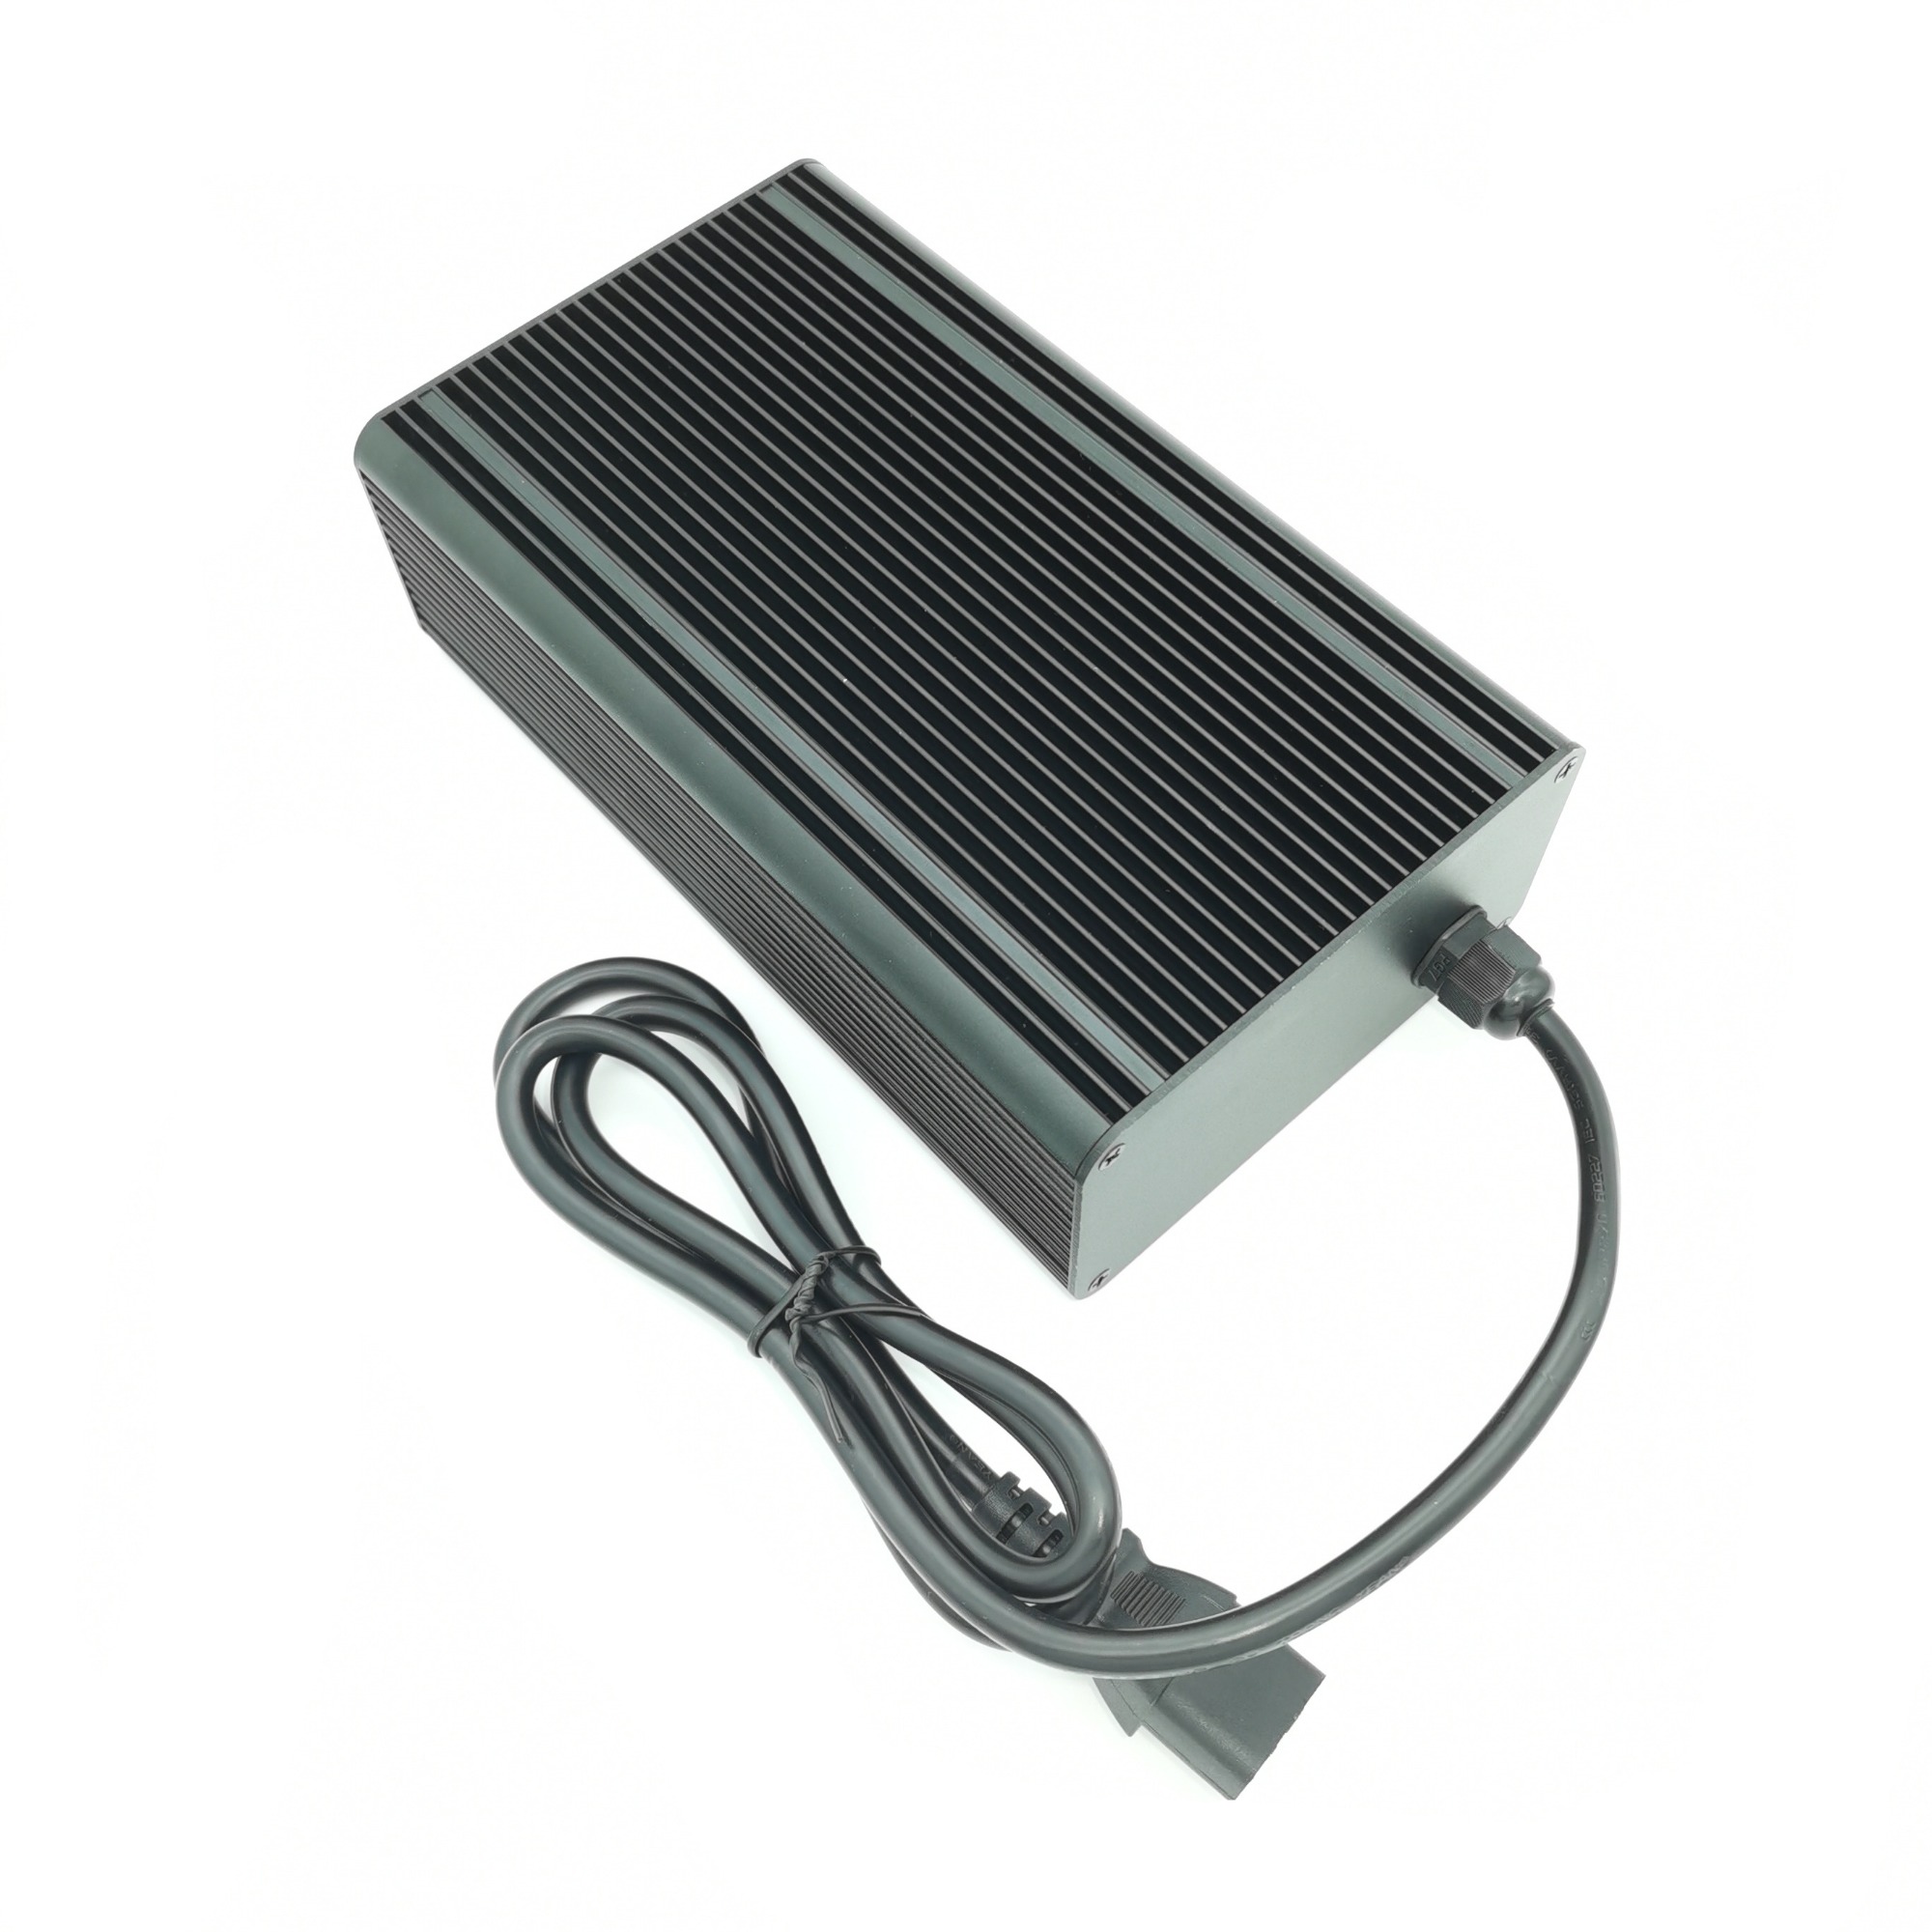 Smart Waterproof design 67.2V 5A Lithium battery charger For 60V 16S Li-ion Battery charger Electric Scooter E-bike motorcycle